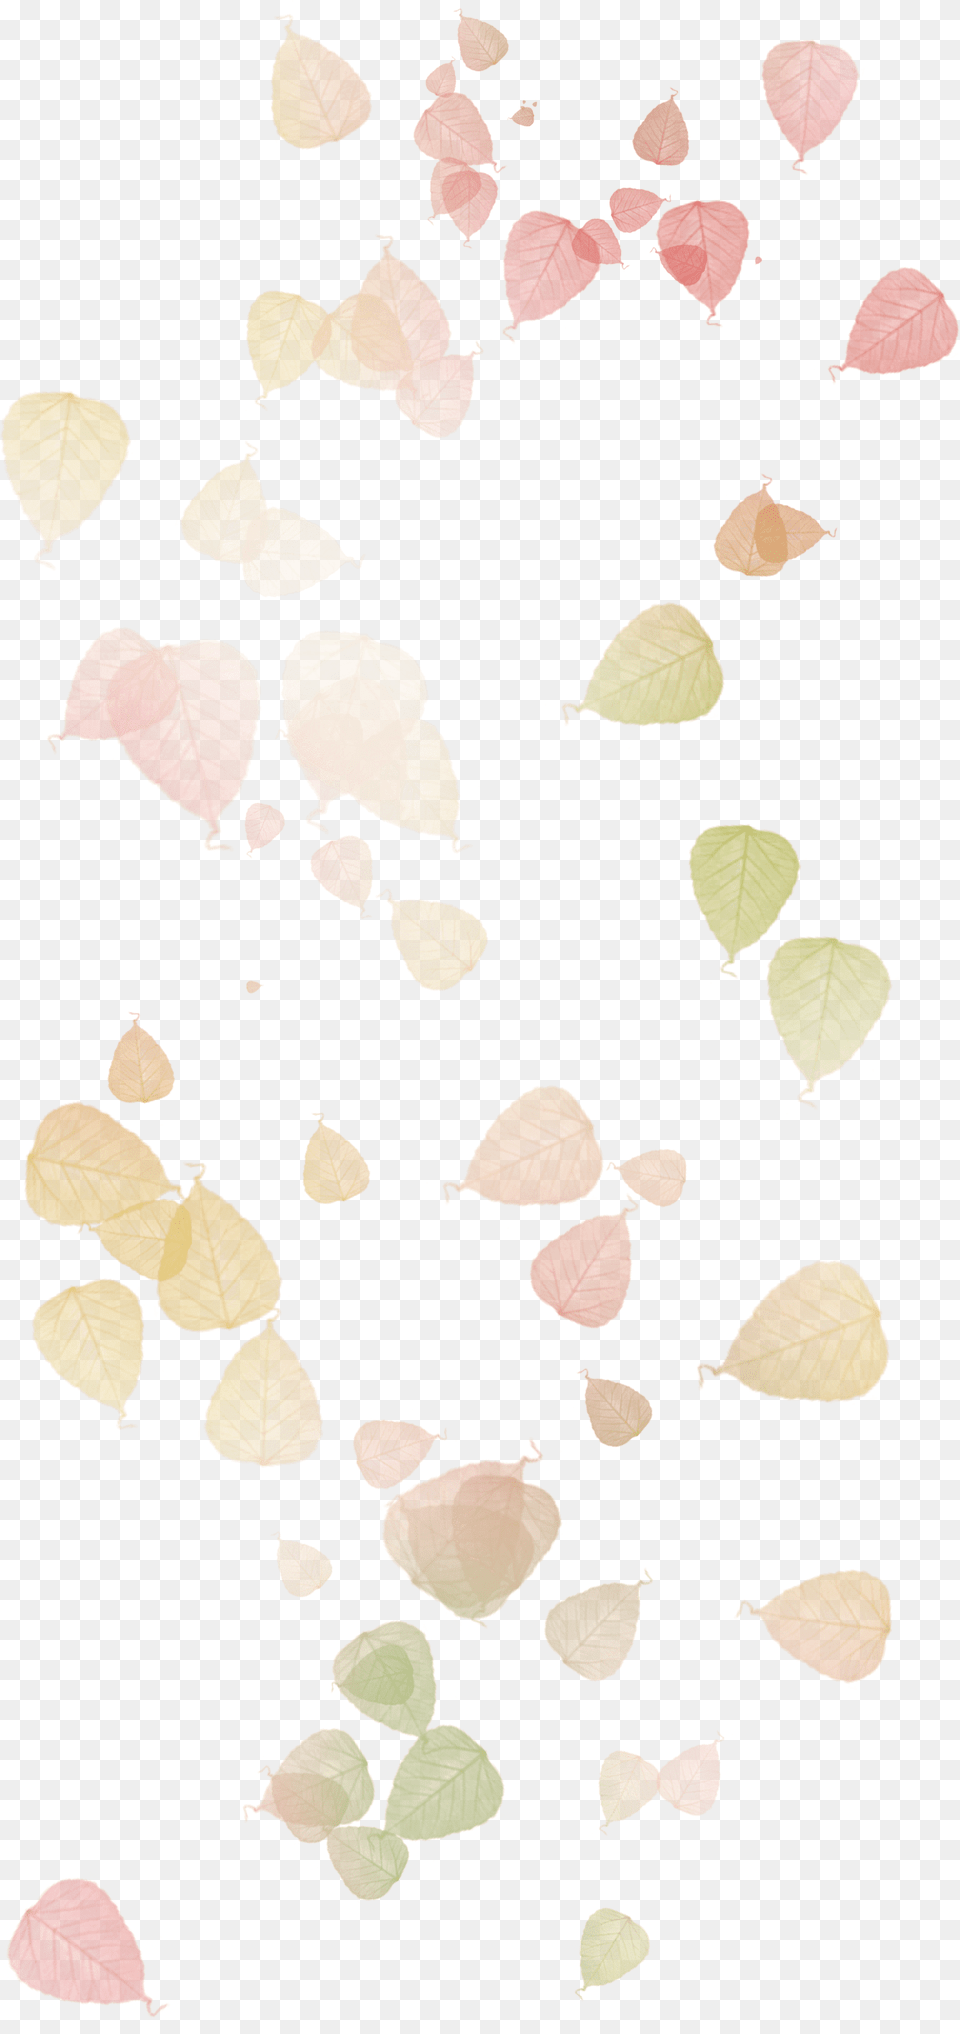 Autumn Leaves Leaf Watercolor Painting Watercolor Leaves Watercolor Painting, Flower, Petal, Plant, Paper Png